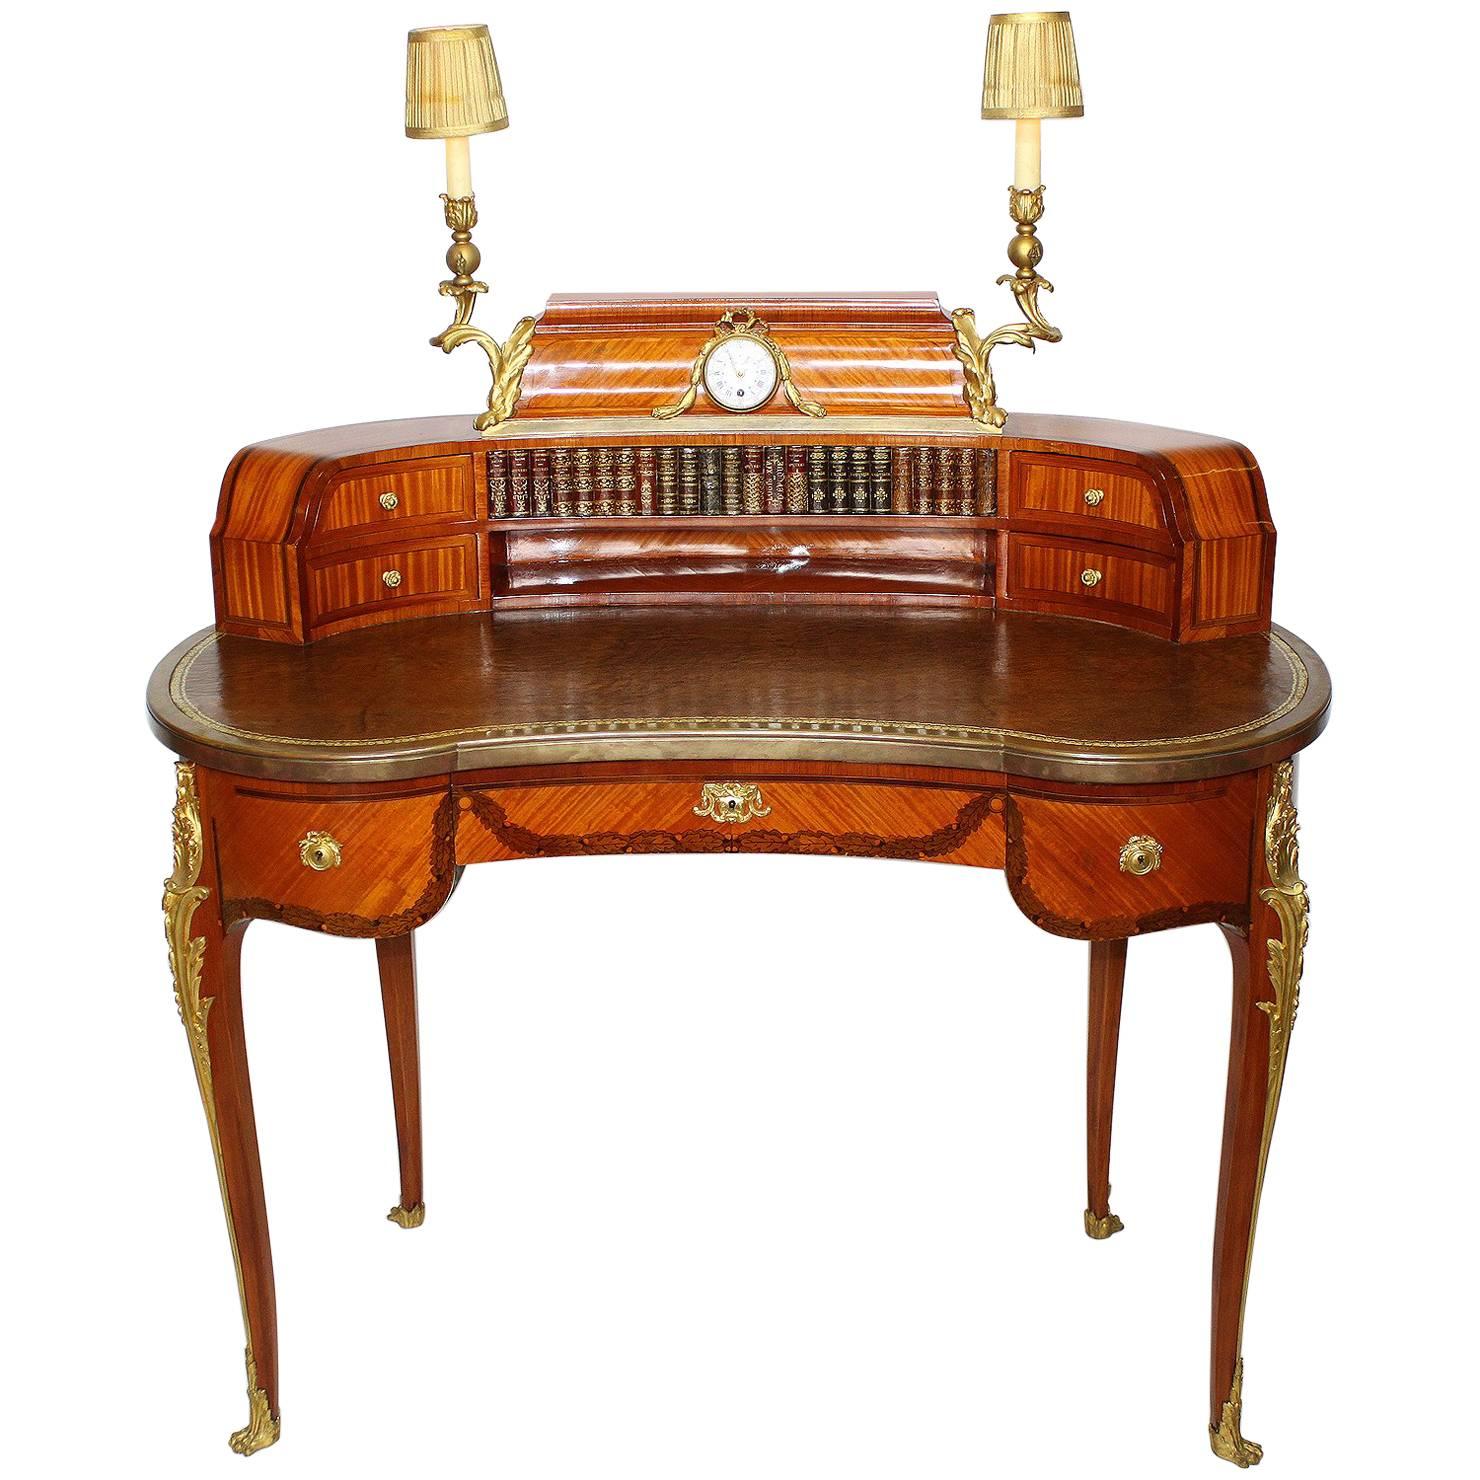 Fine French 19th Century Louis XV Style Tulipwood and Ormolu-Mounted Ladies Desk